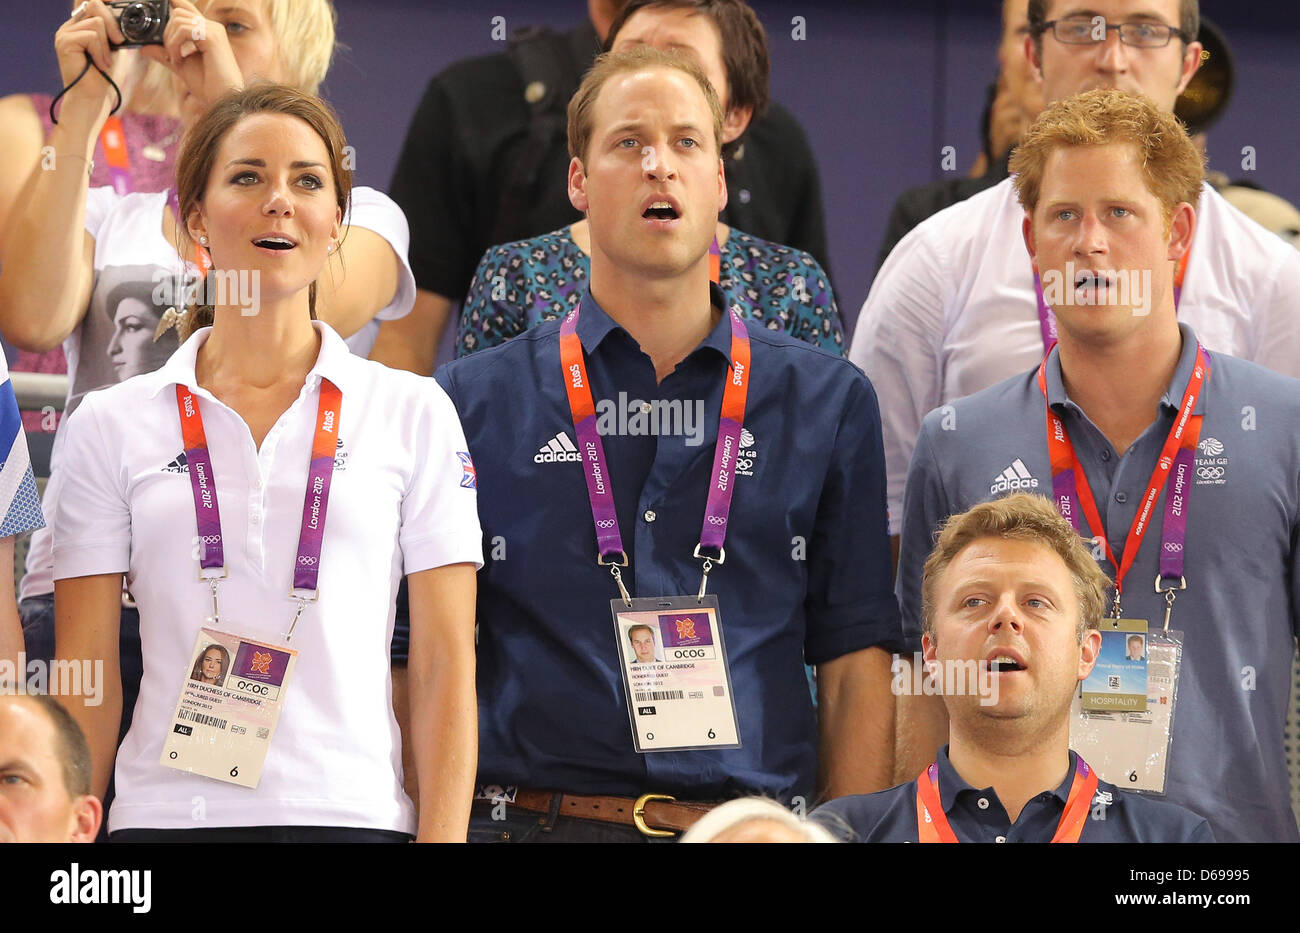 Prince William (C), Duke of Cambridge and Catherine (L), Duchess of Cambridge Prince Harry (R) sing the national anthem after Great Britain wons the men's team sprint in Velodrom at the London 2012 Olympic Games, London, Great Britain, 02 August 2012. Photo: Christian Charisius dpa Stock Photo